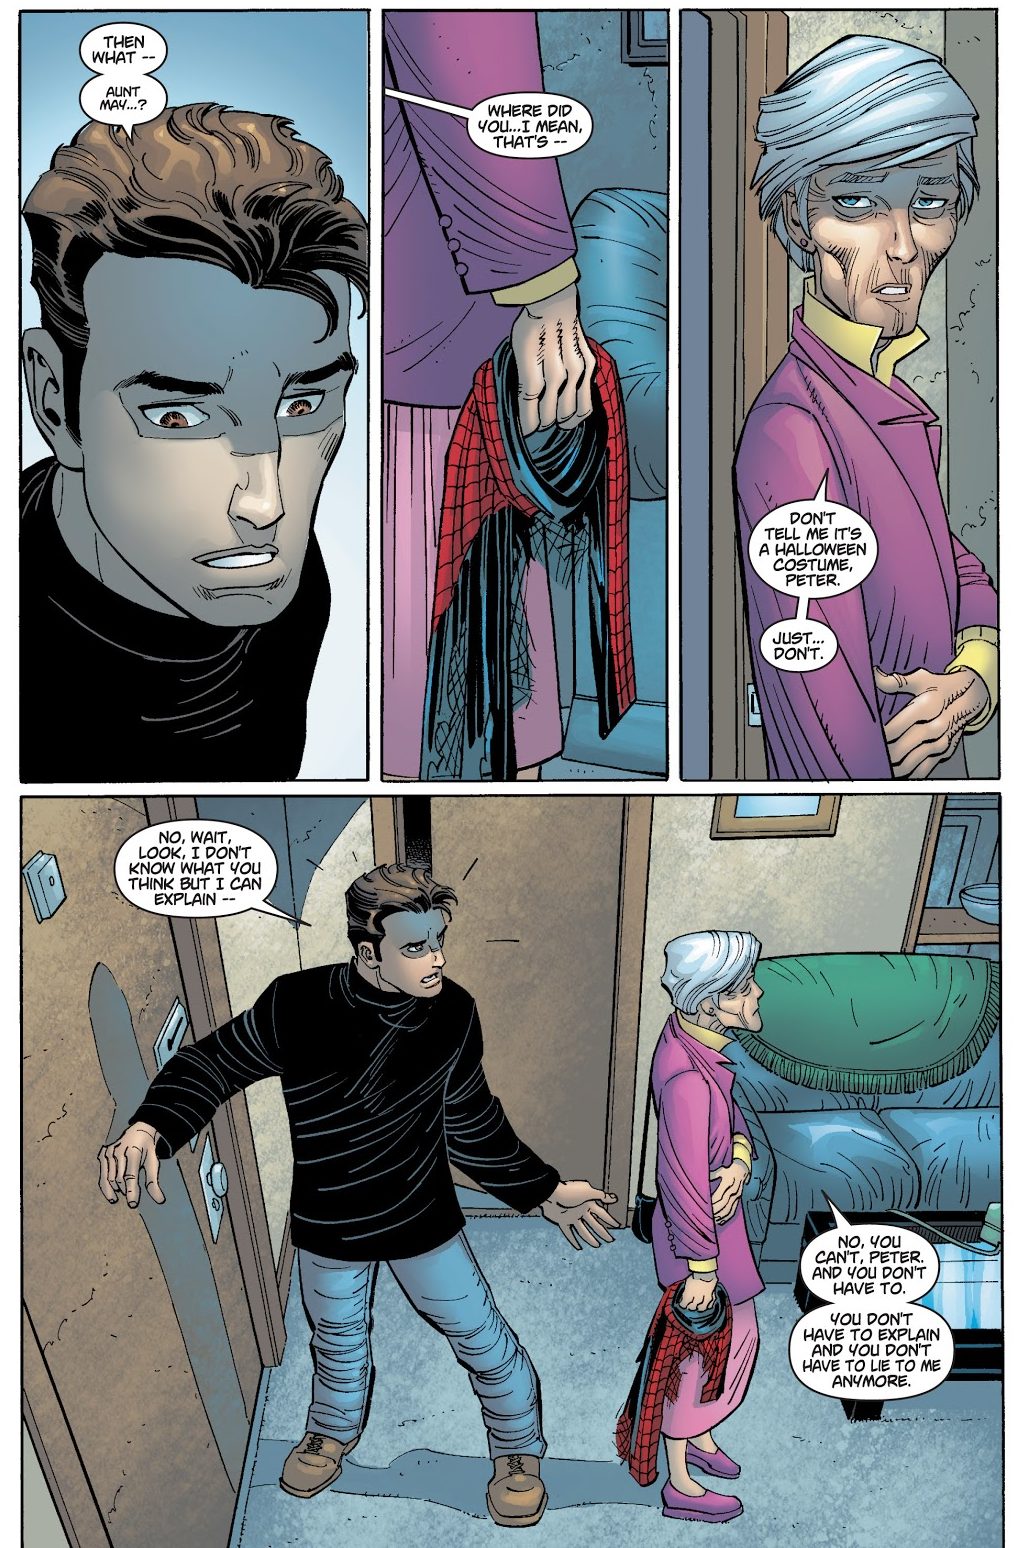 From - The Amazing Spider-Man Vol. 2 #38